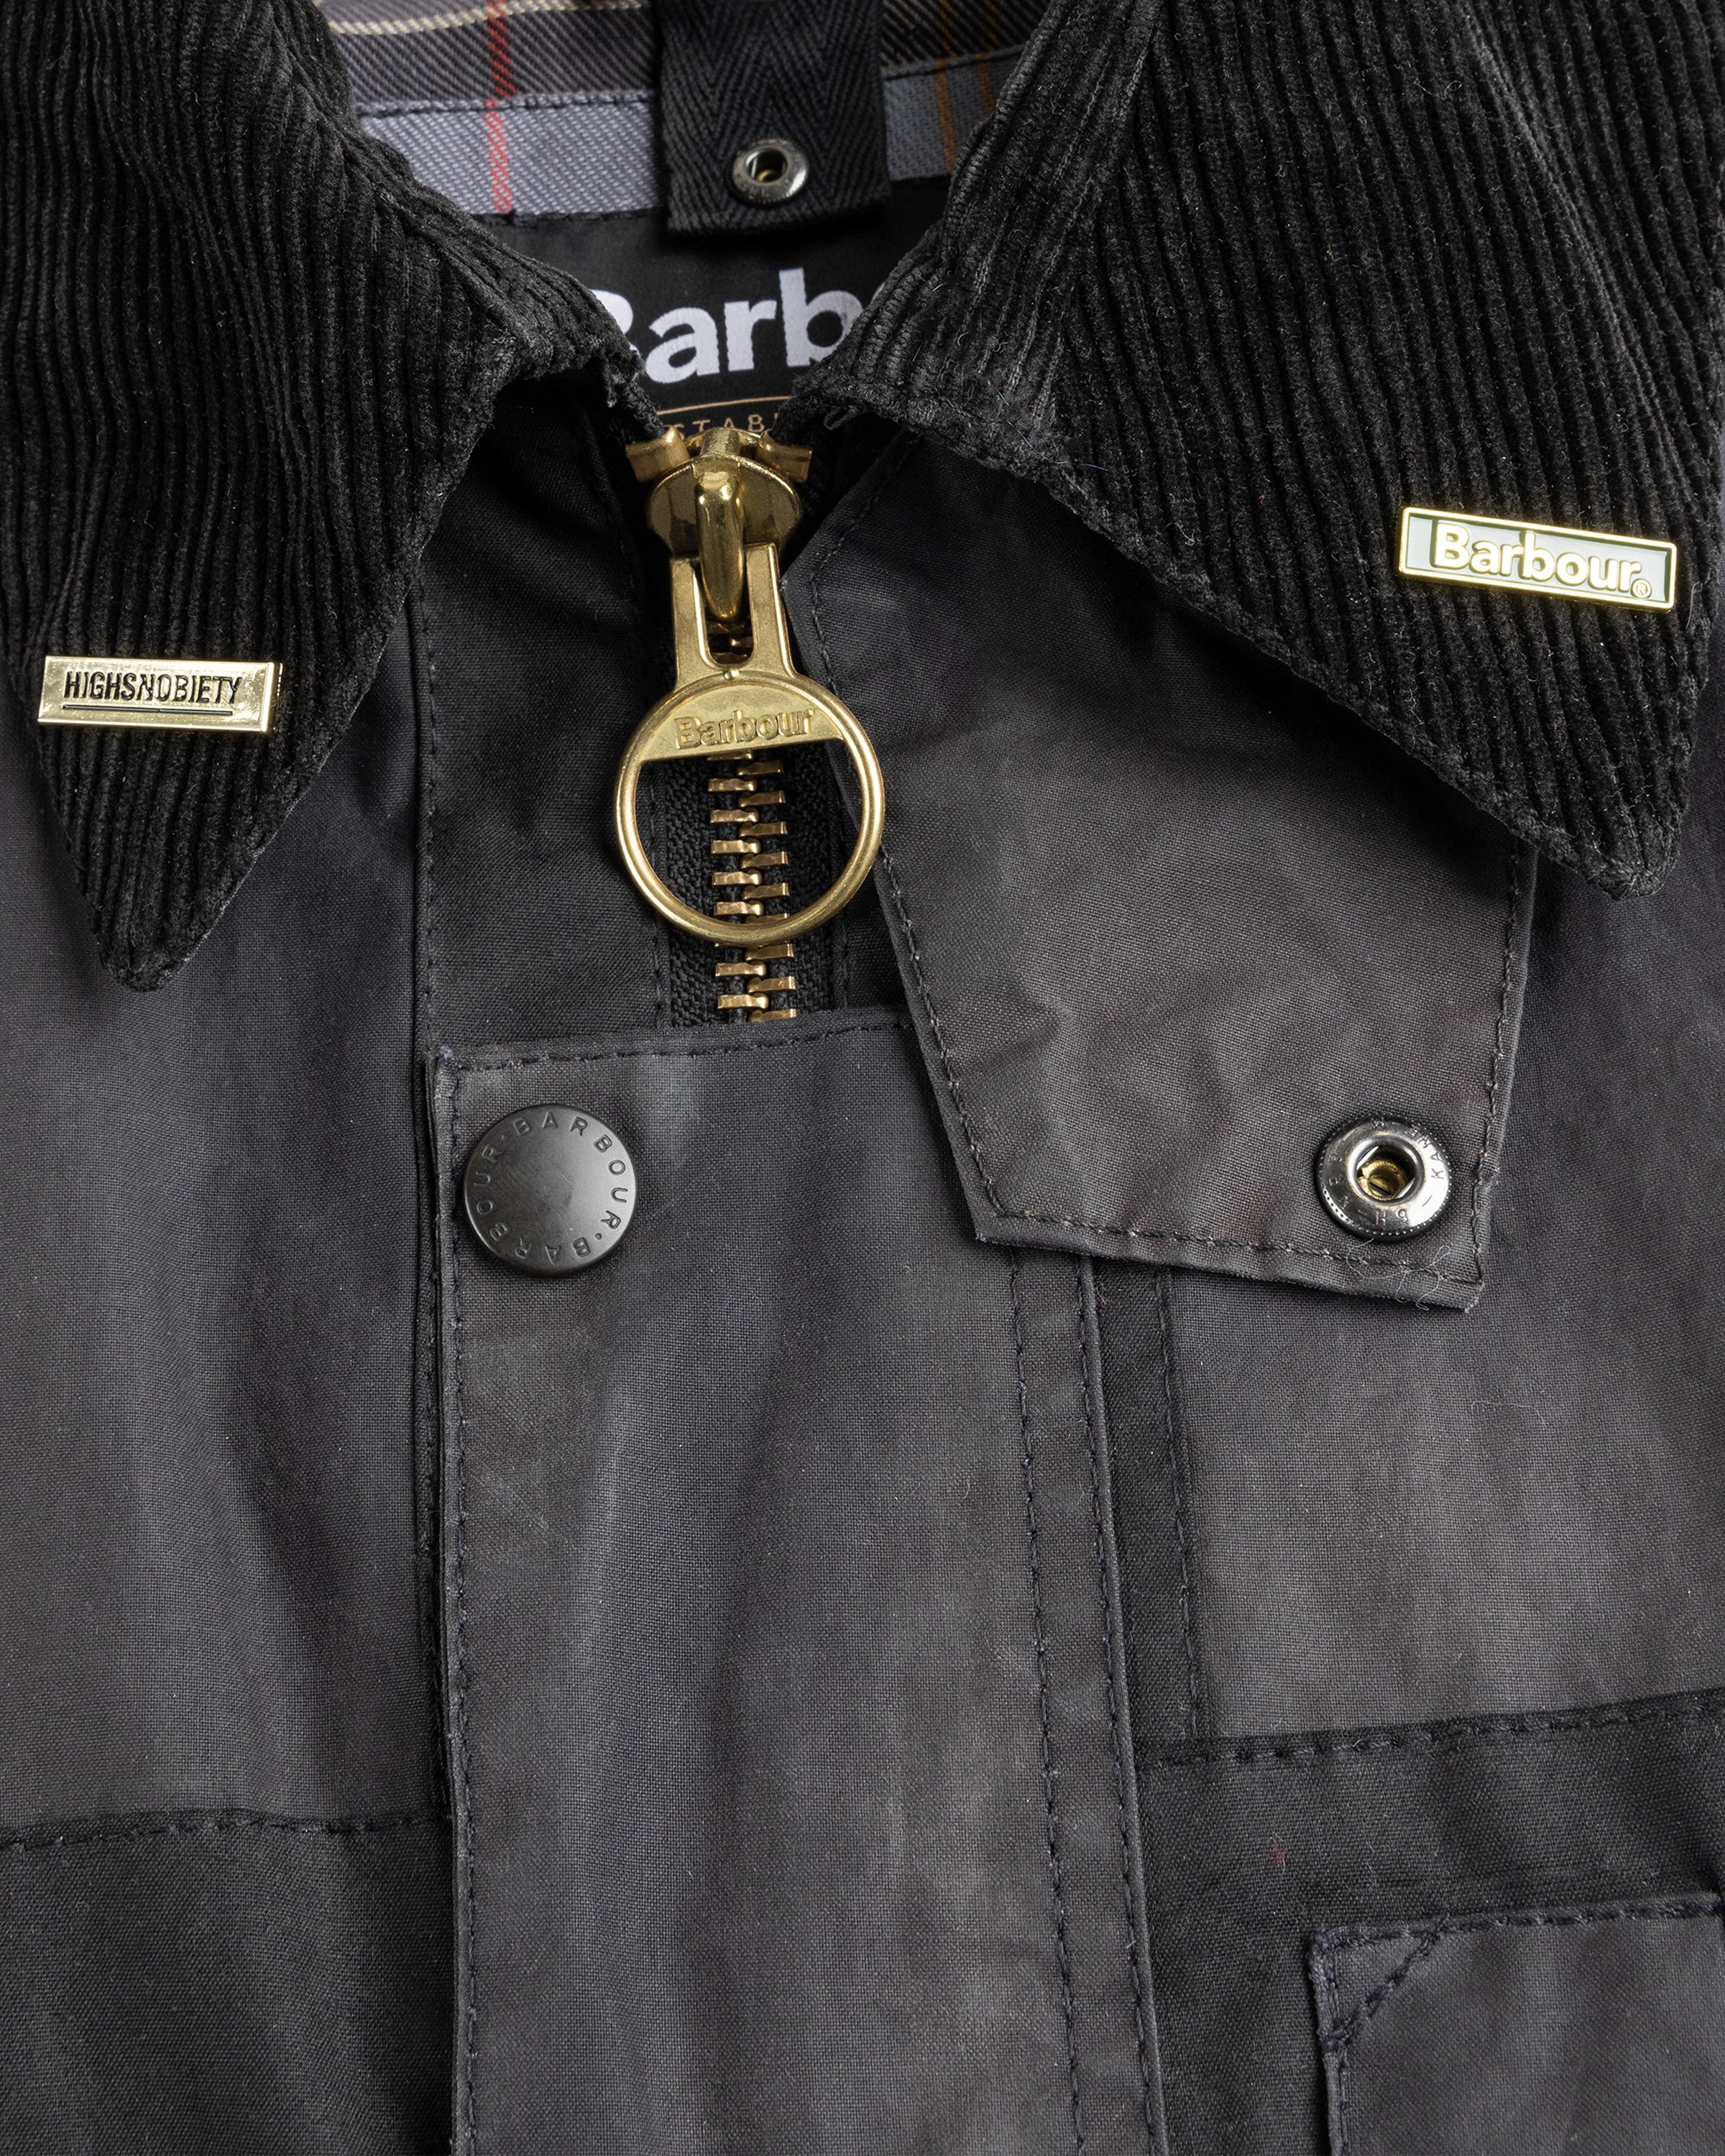 Barbour x Highsnobiety - Re-Loved Cropped Bedale Jacket 1 - 32 - Grey-Black - Clothing - Grey - Image 3